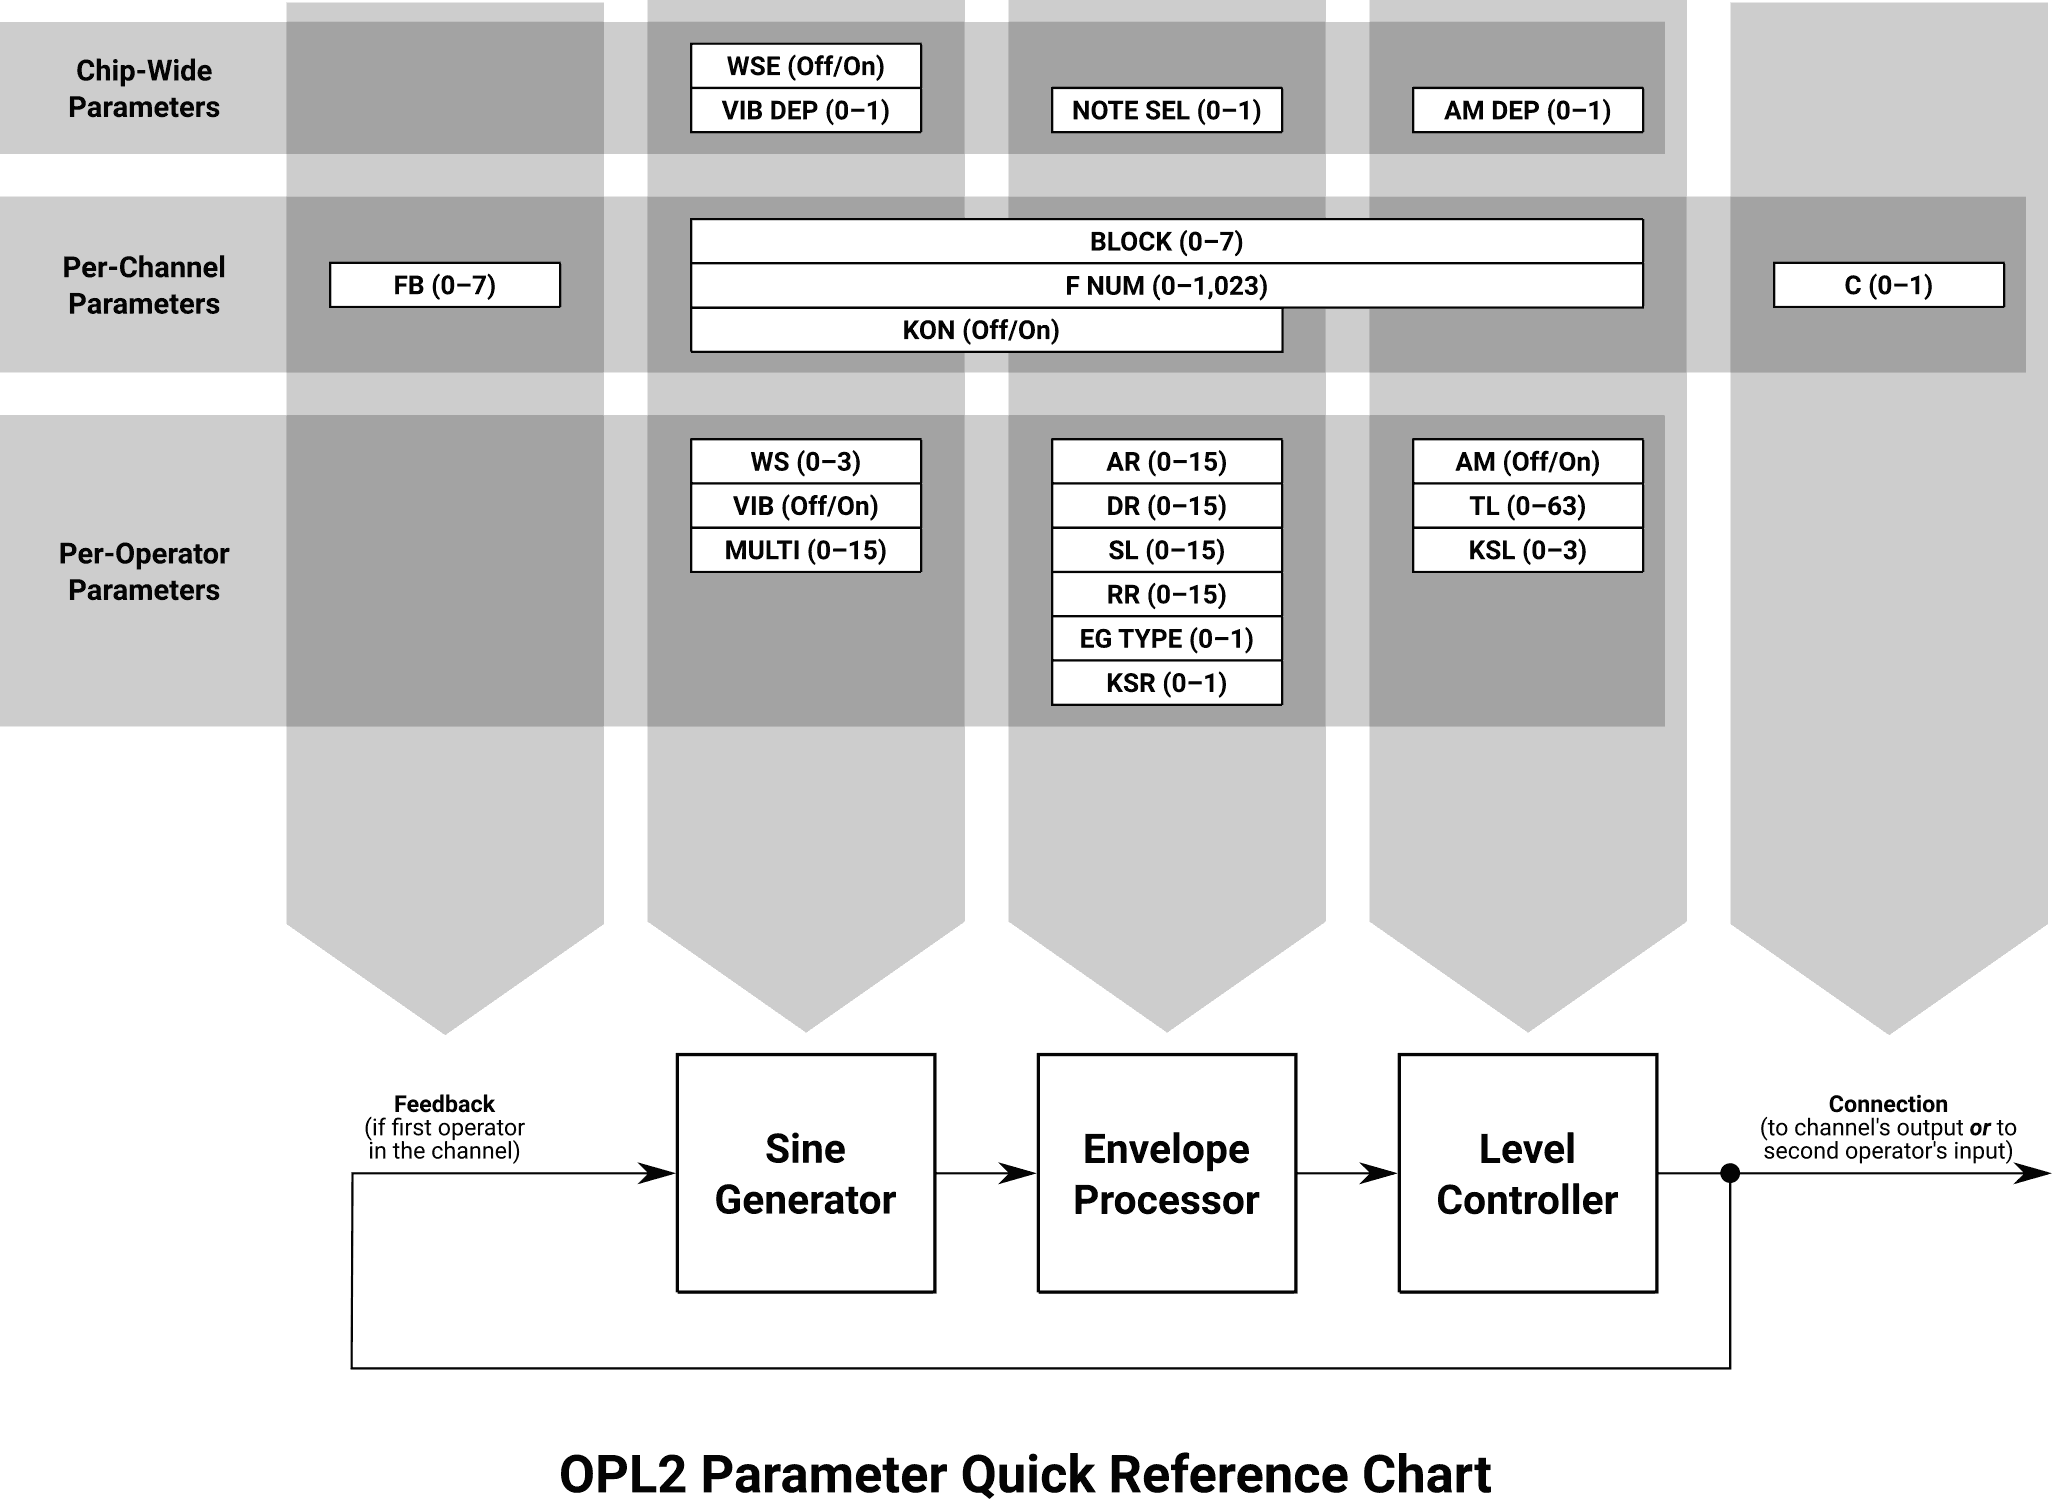 Quick reference chart of all relevant OPL2 parameters and their effect on a single operator.